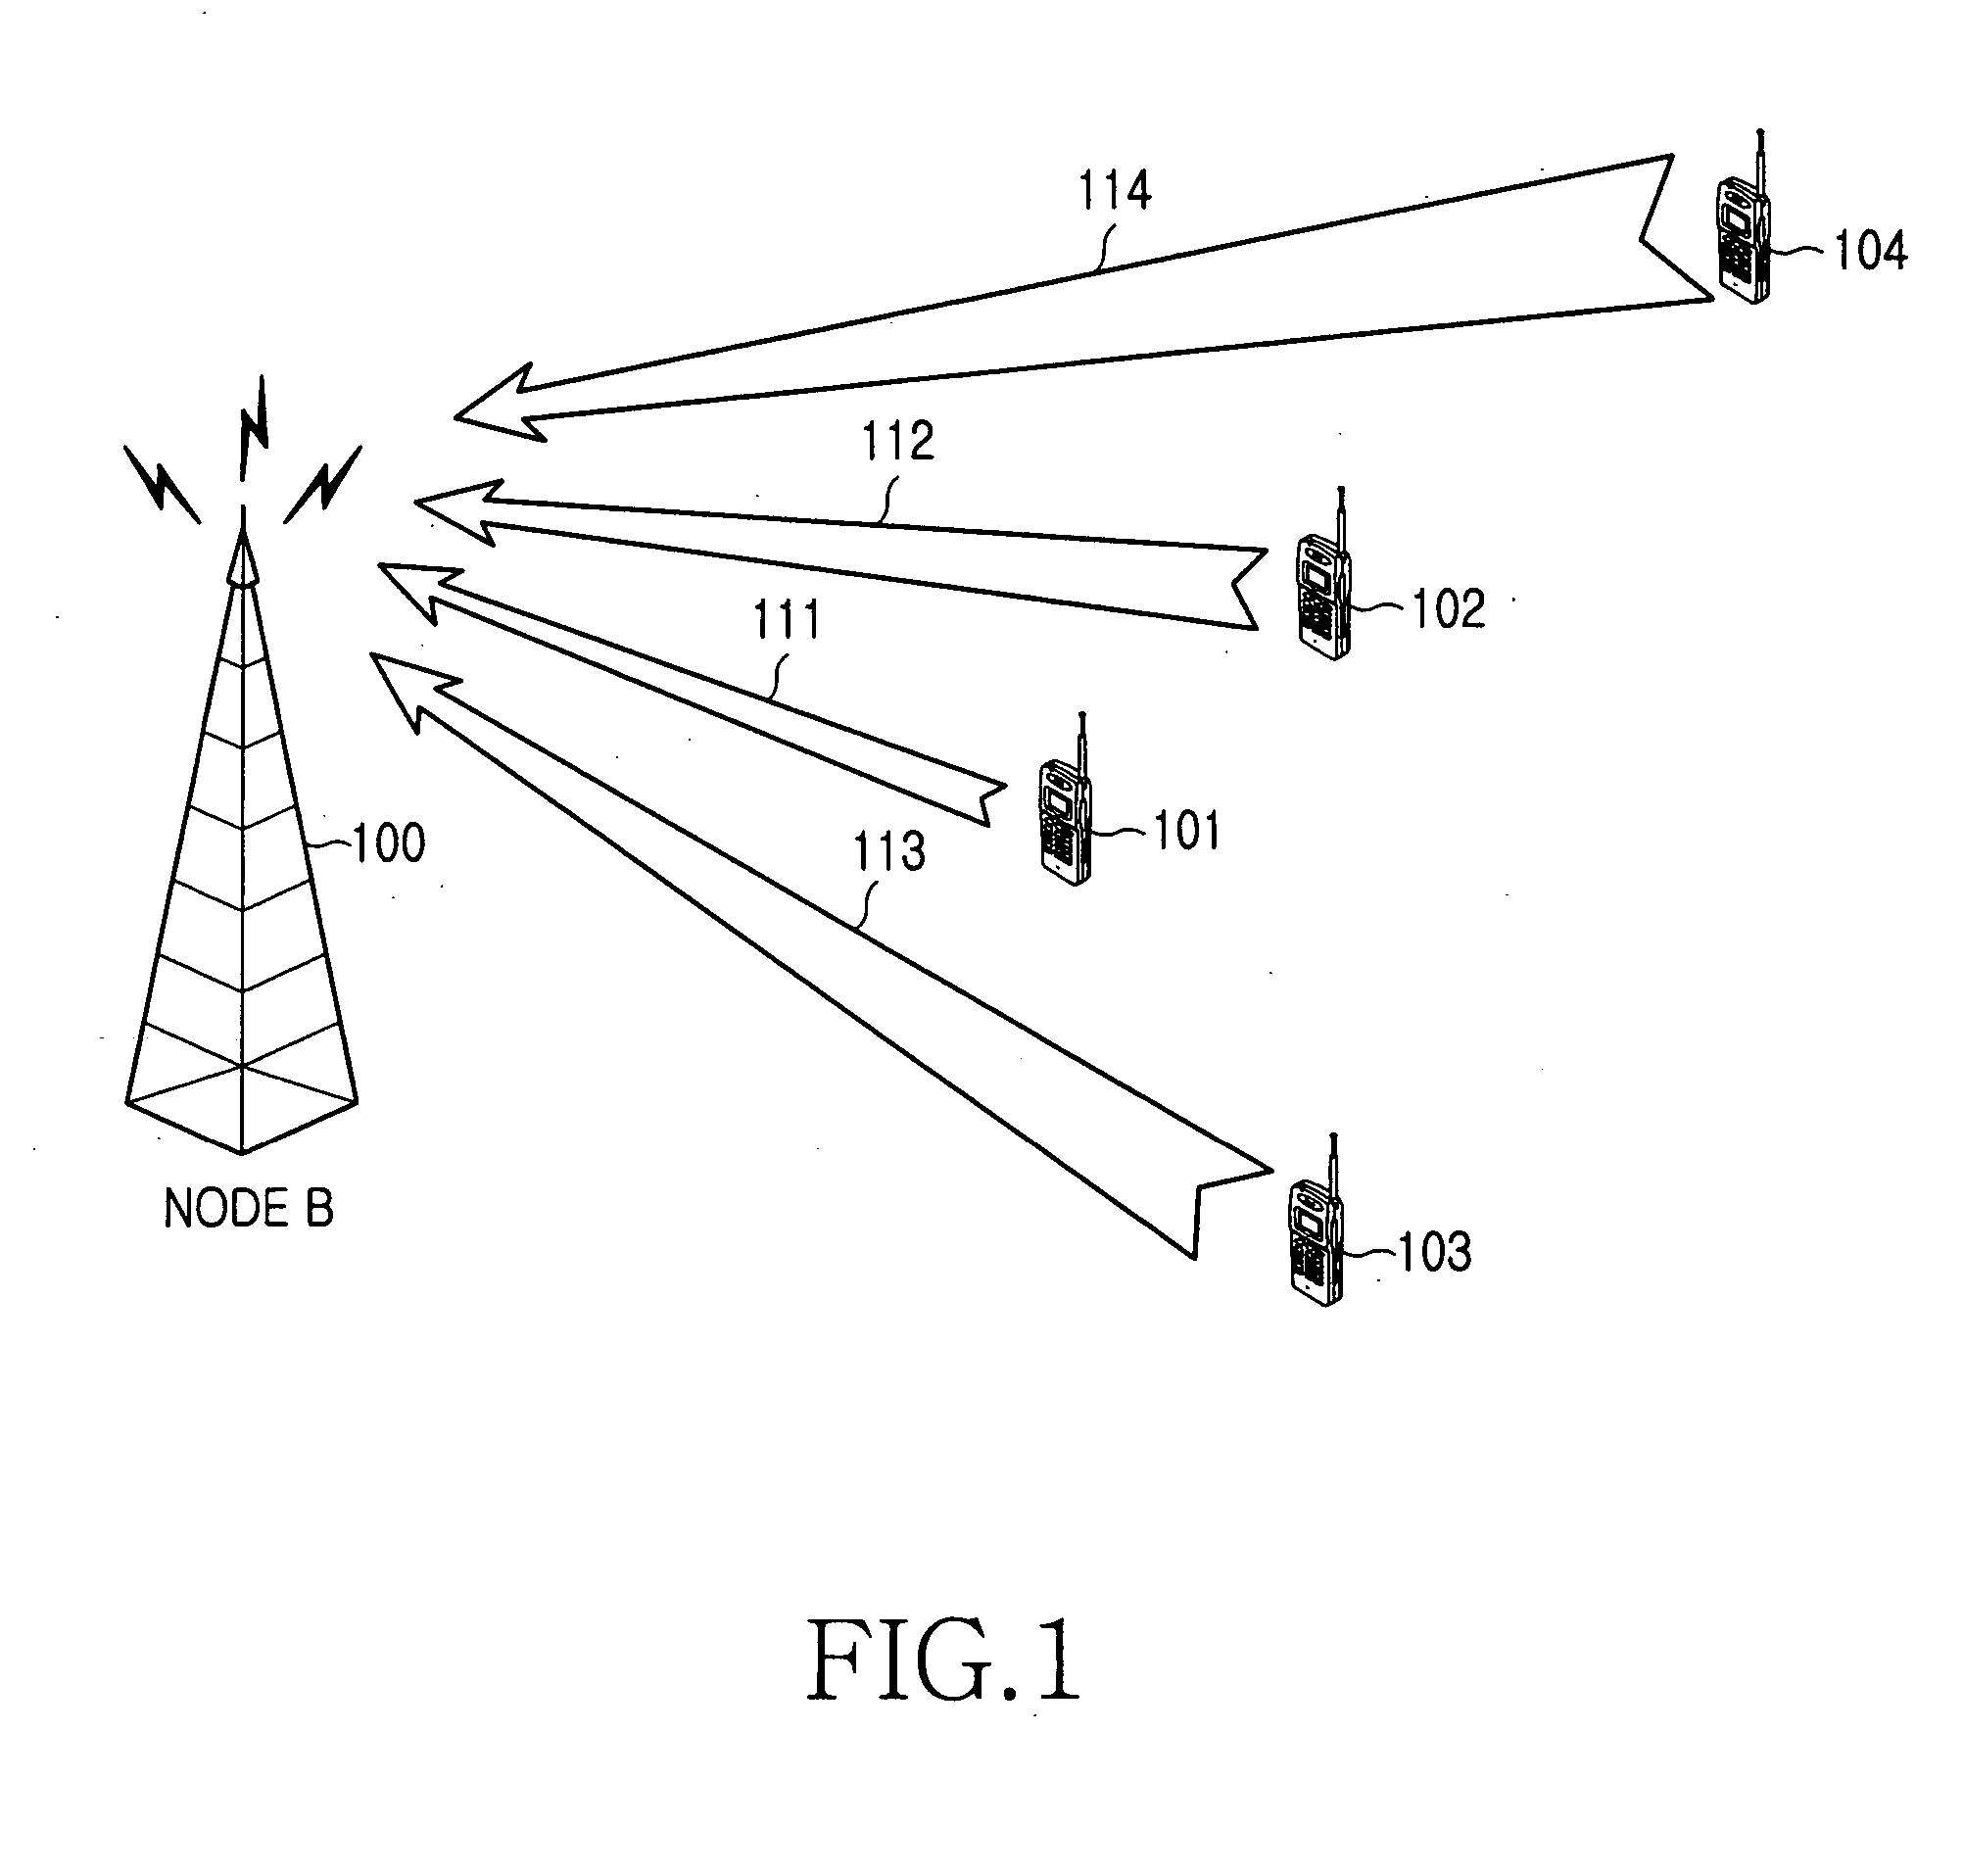 Method and apparatus for data transmission/scheduling for uplink packet data service in a mobile communication system